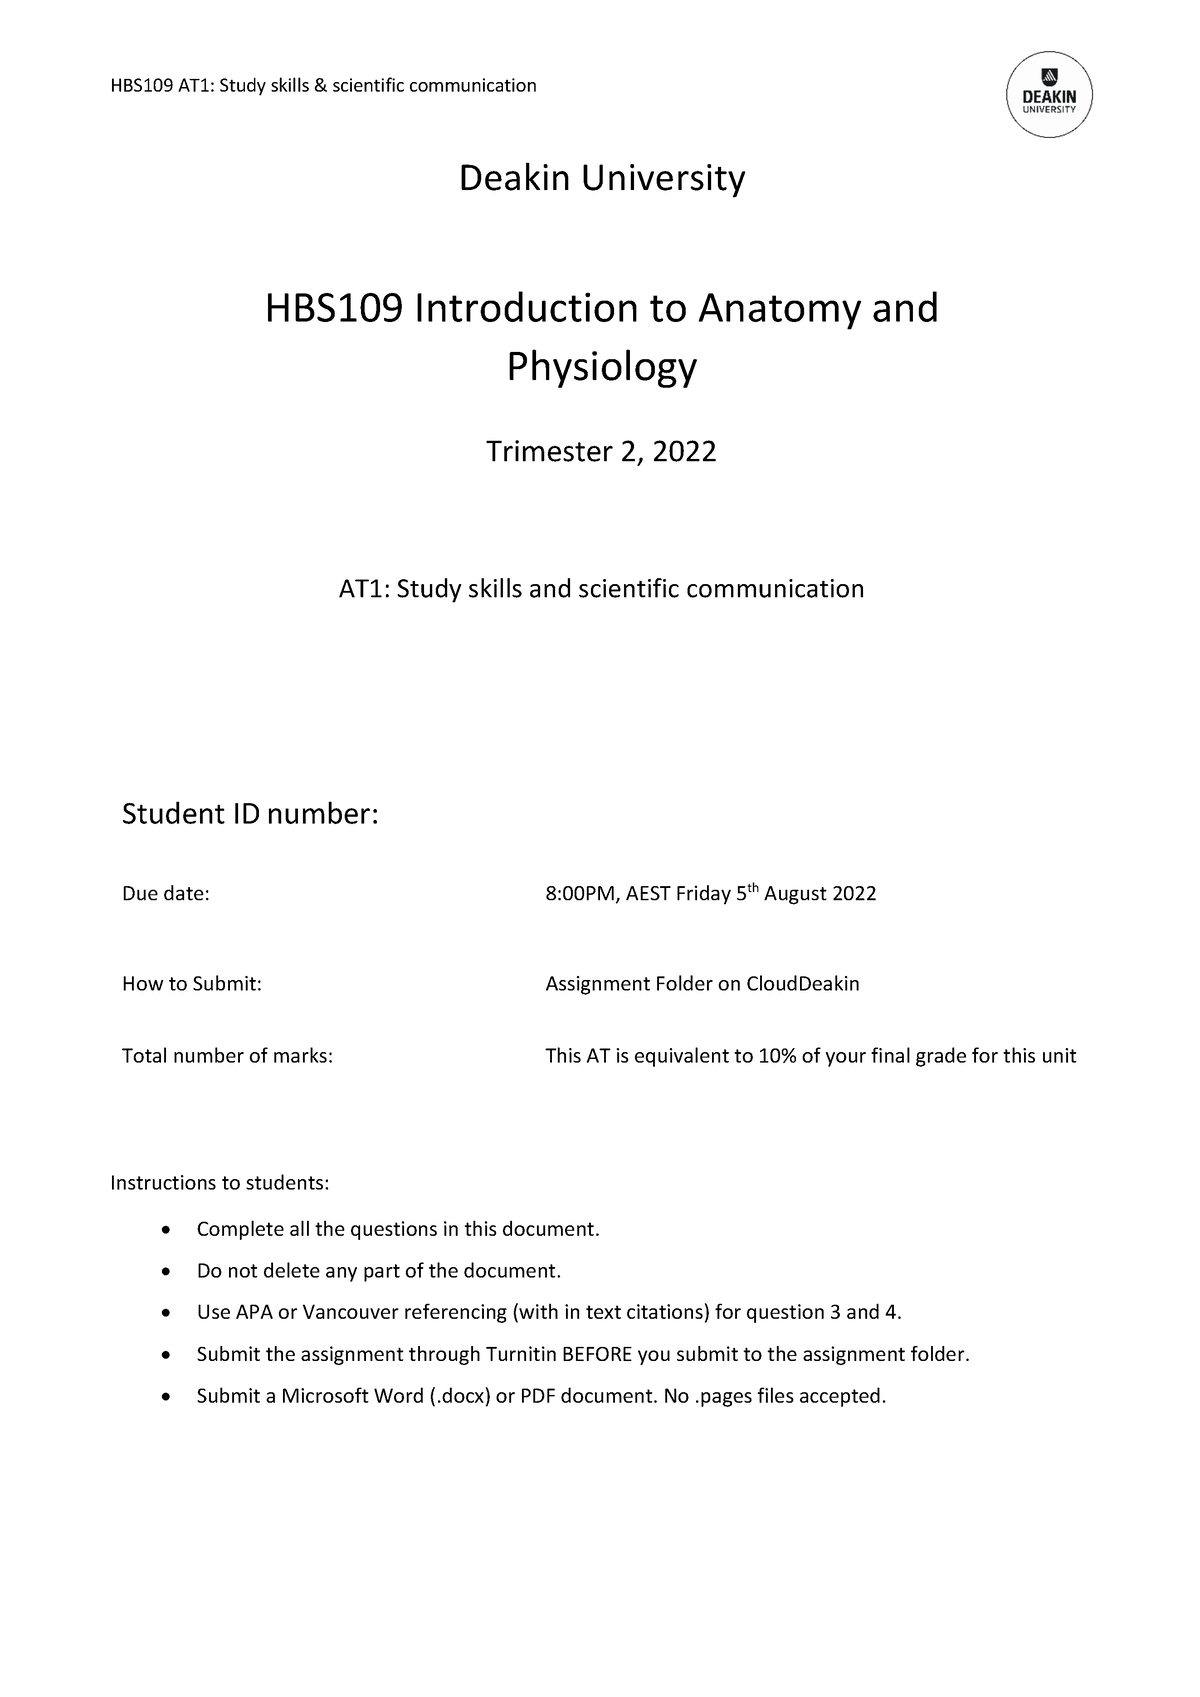 thesis template deakin